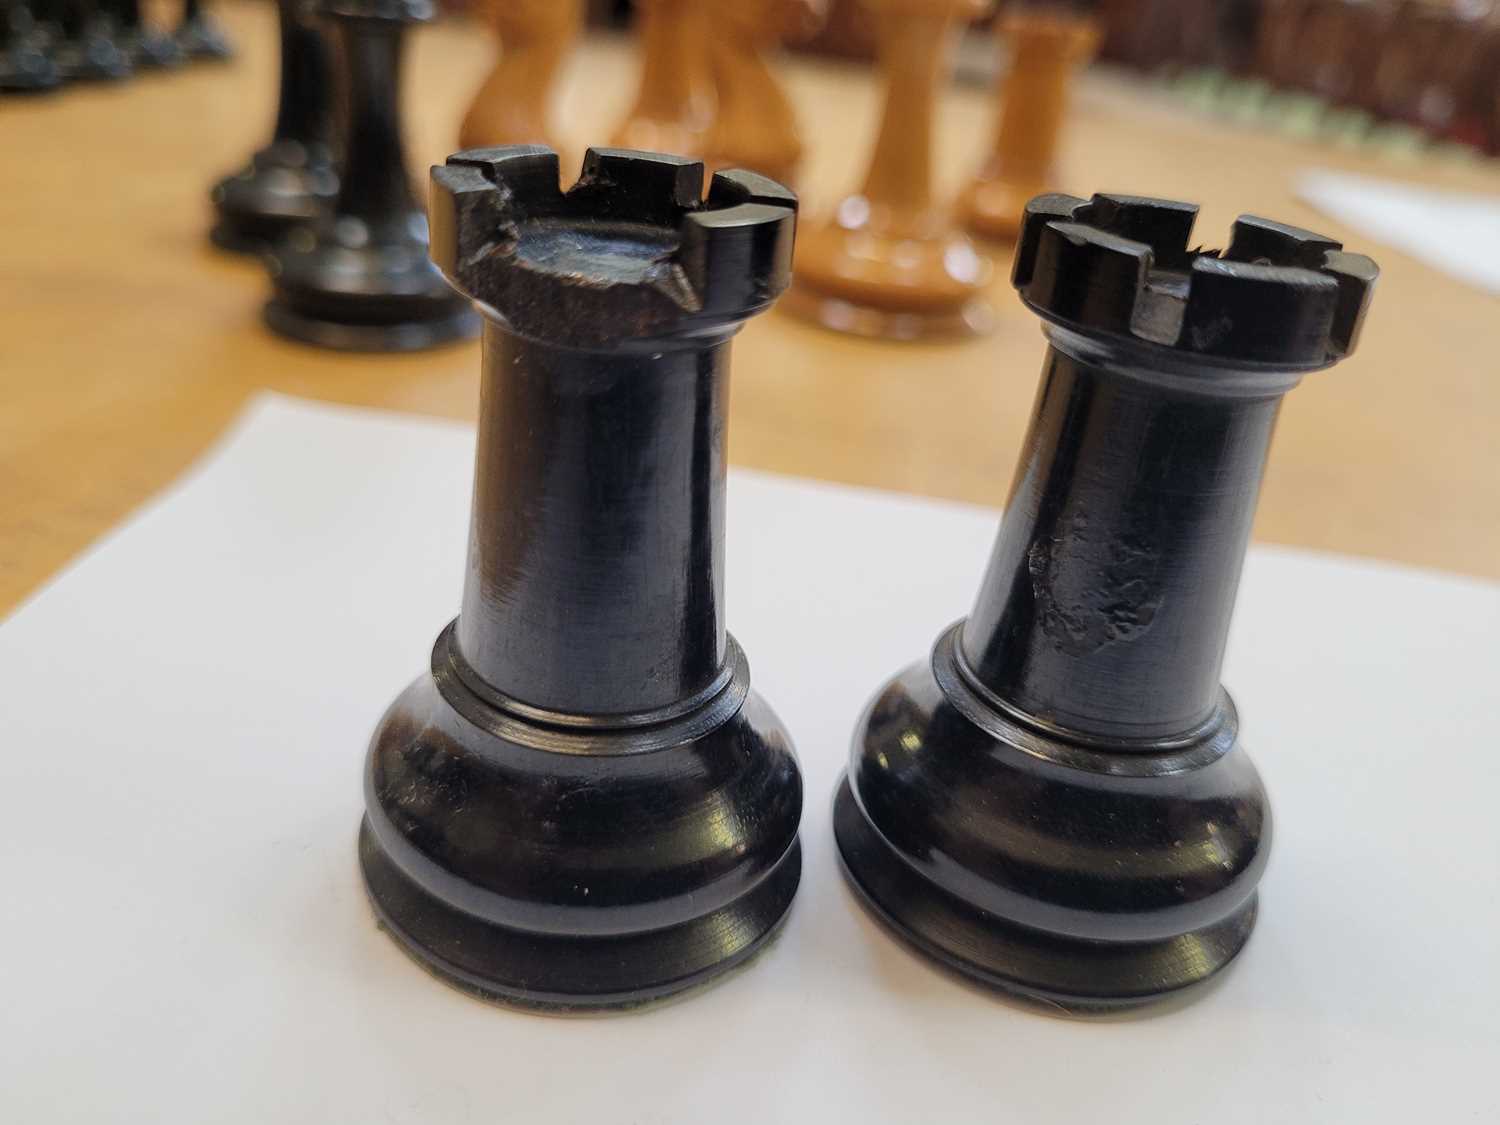 Jacques, London: 'The Staunton Chess Men' boxwood and ebony chess set, mid-19th century, within a - Image 29 of 43